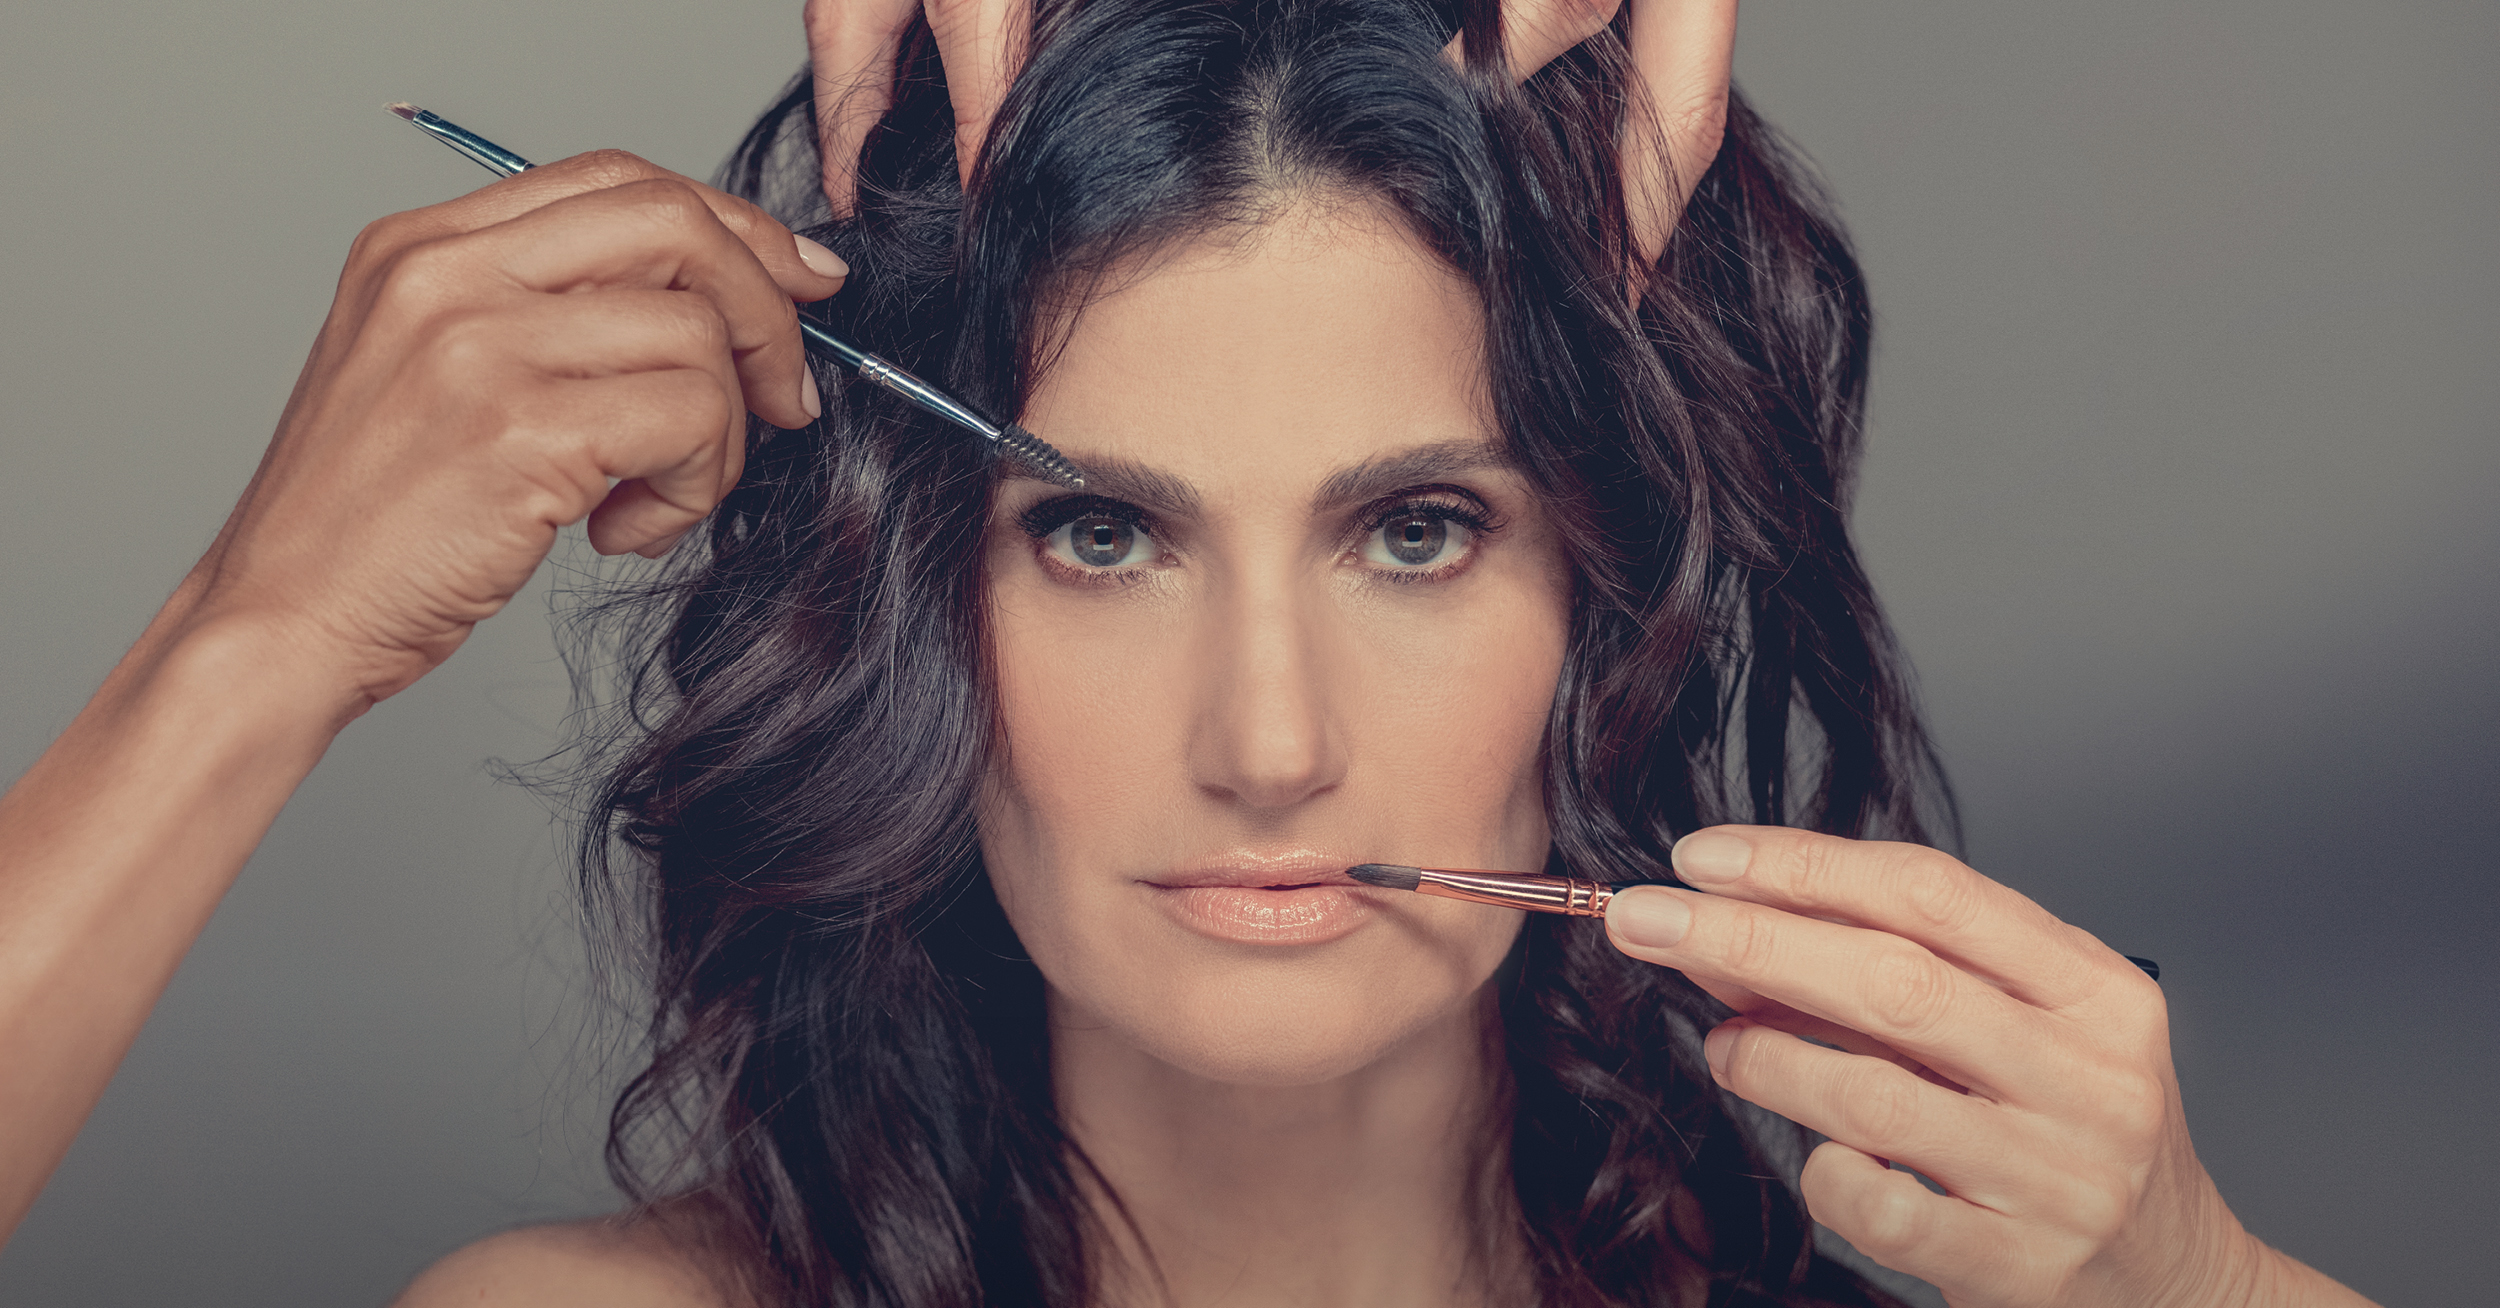 Skintight: Idina Menzel Live in a Theatrical Comedy